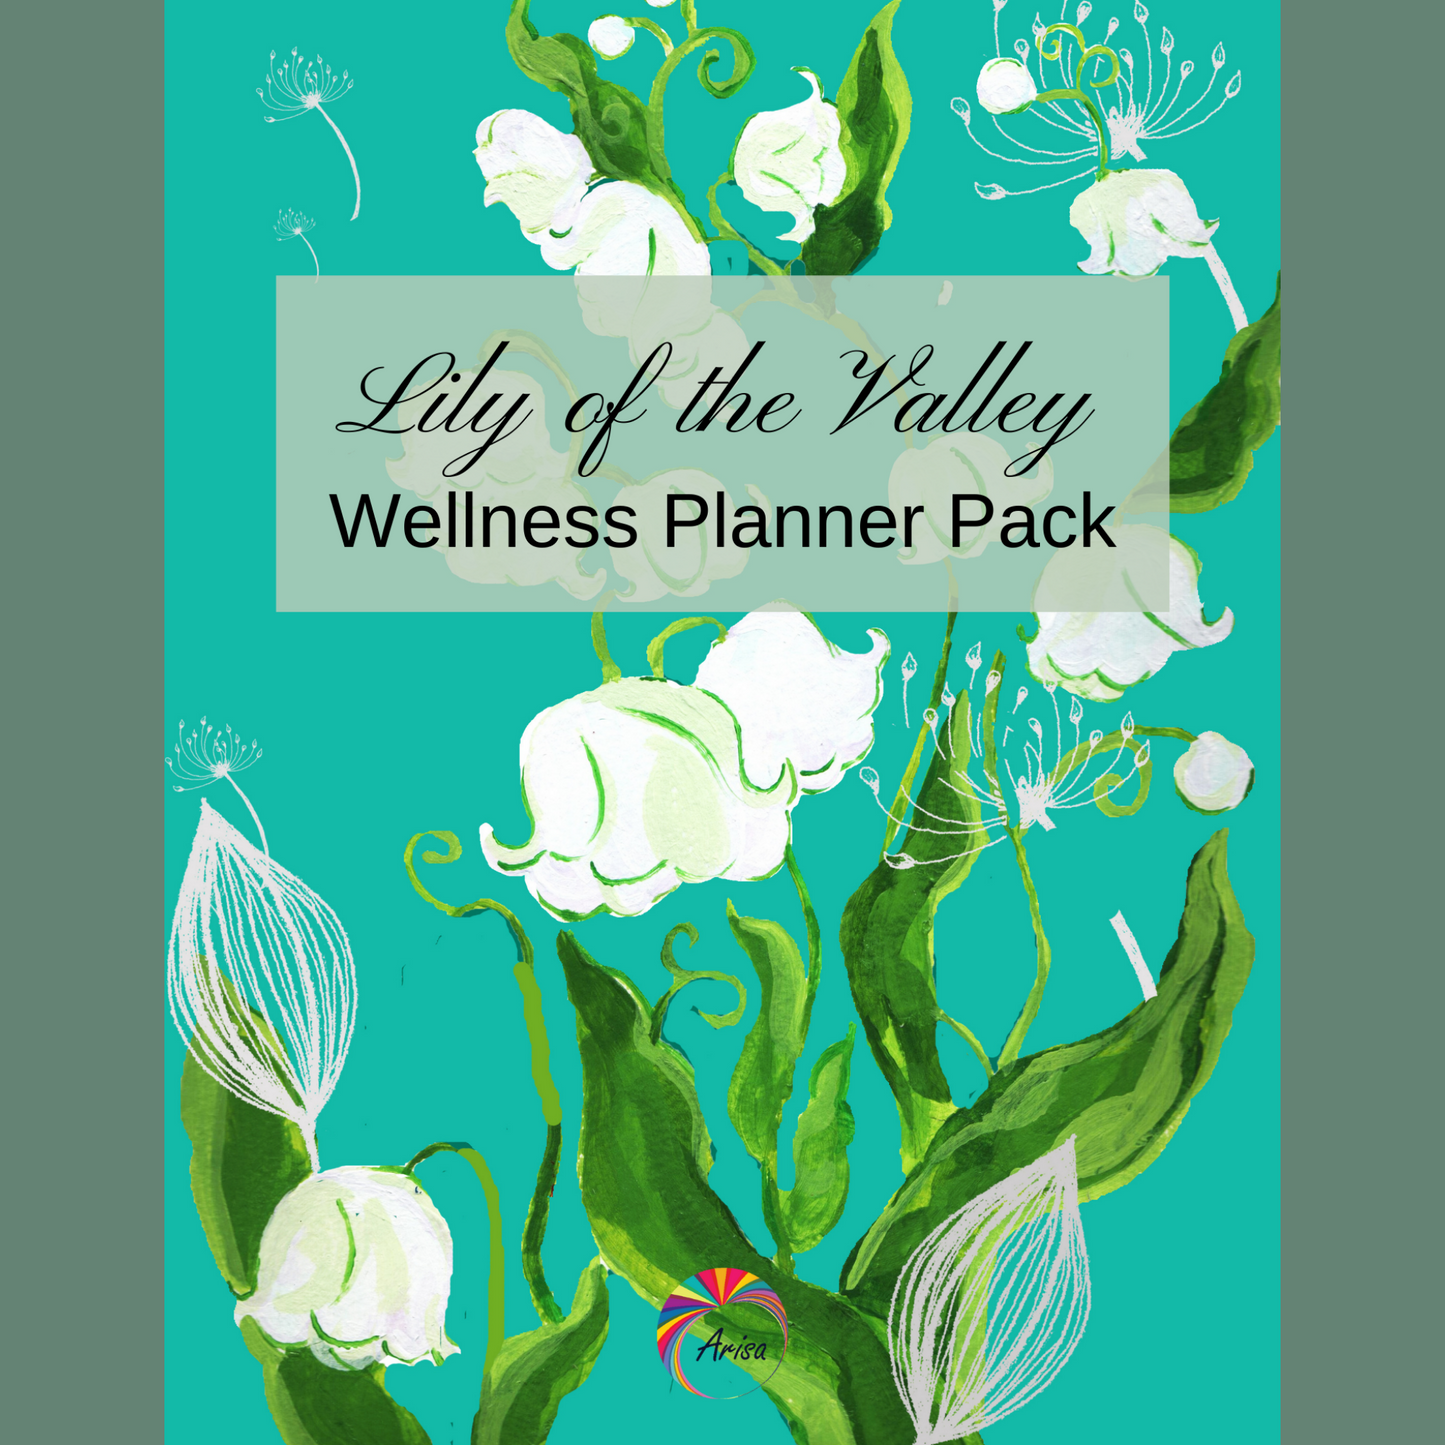 The cover of the "Lily of The Valley" wellness planner pack by Arisateam